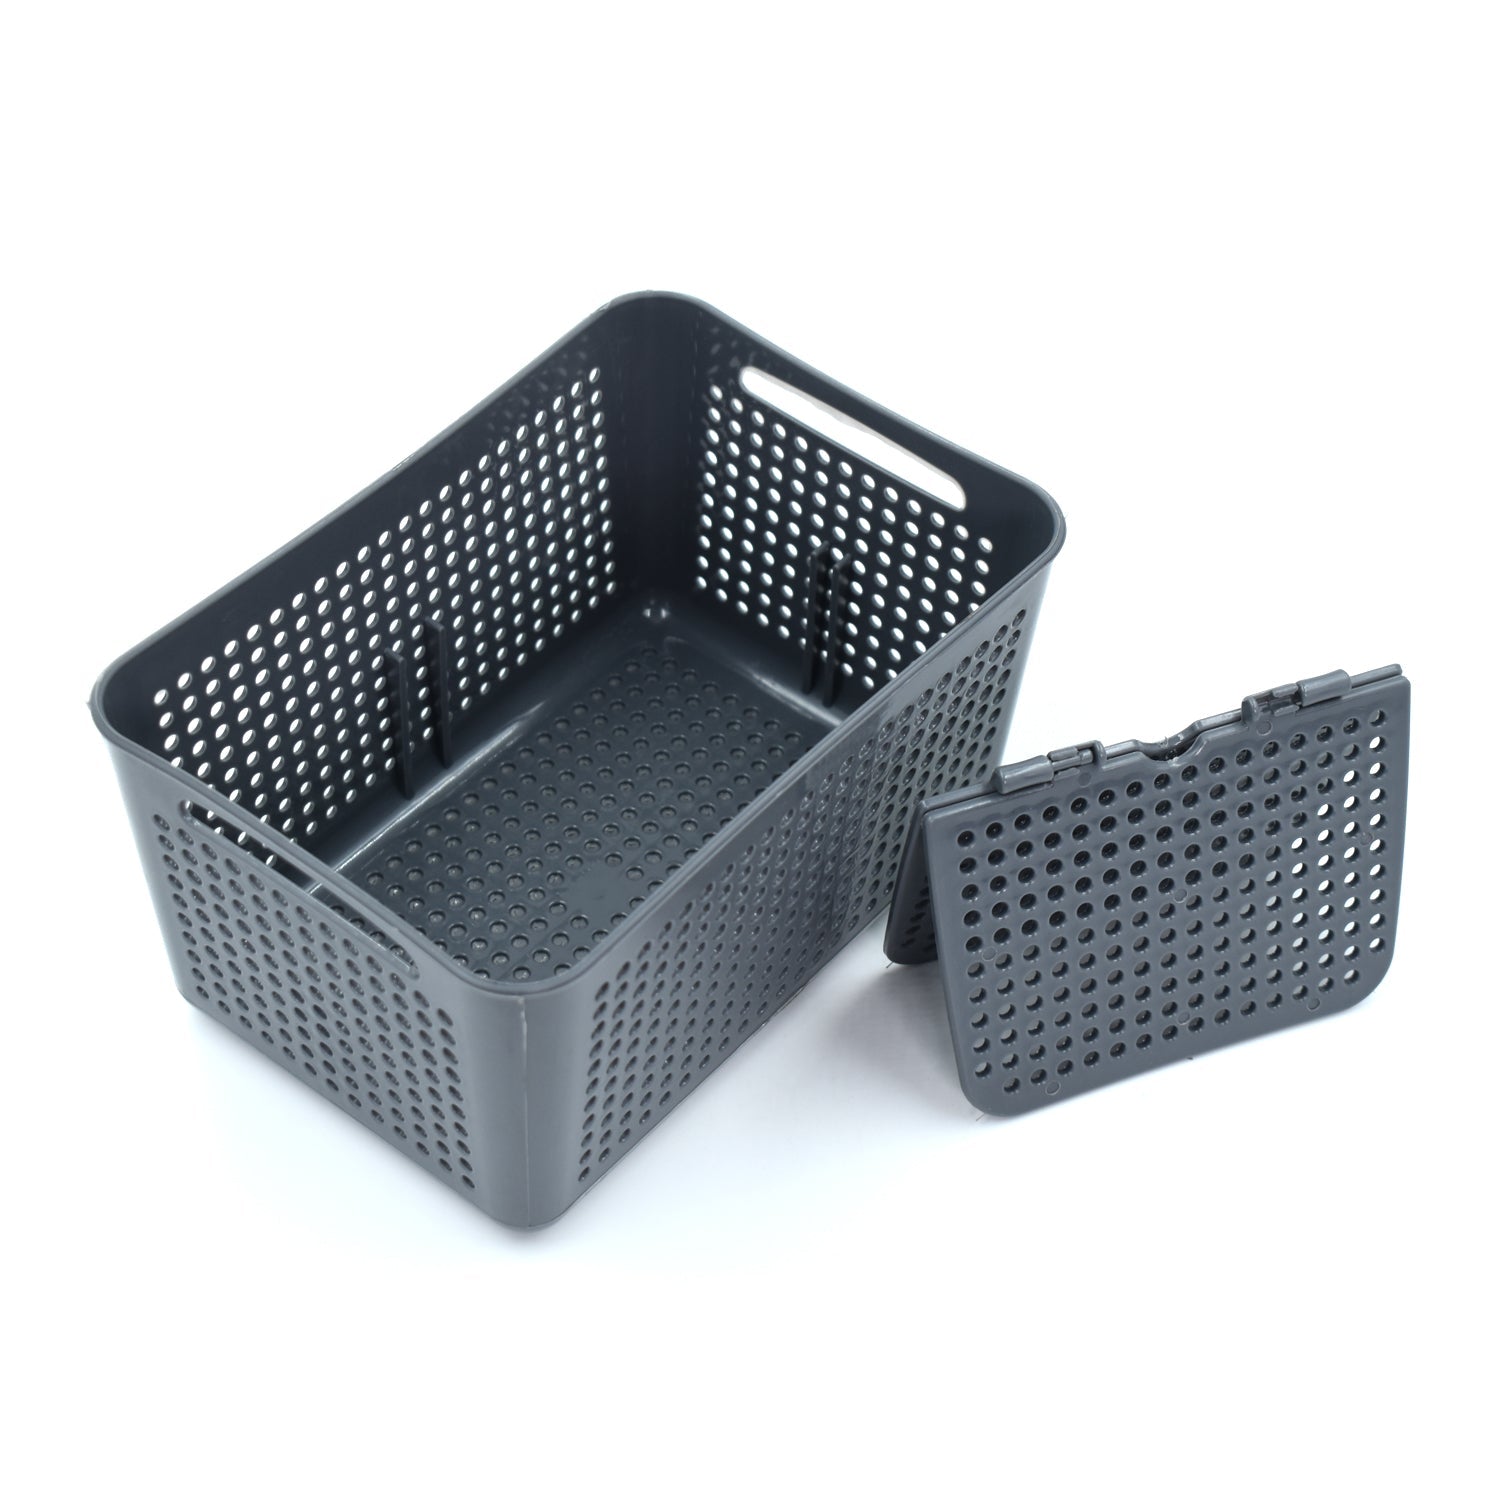 2826 Fordable Silicone Kitchen Organiser Fruit Vegetable Baskets Folding Strainers DeoDap